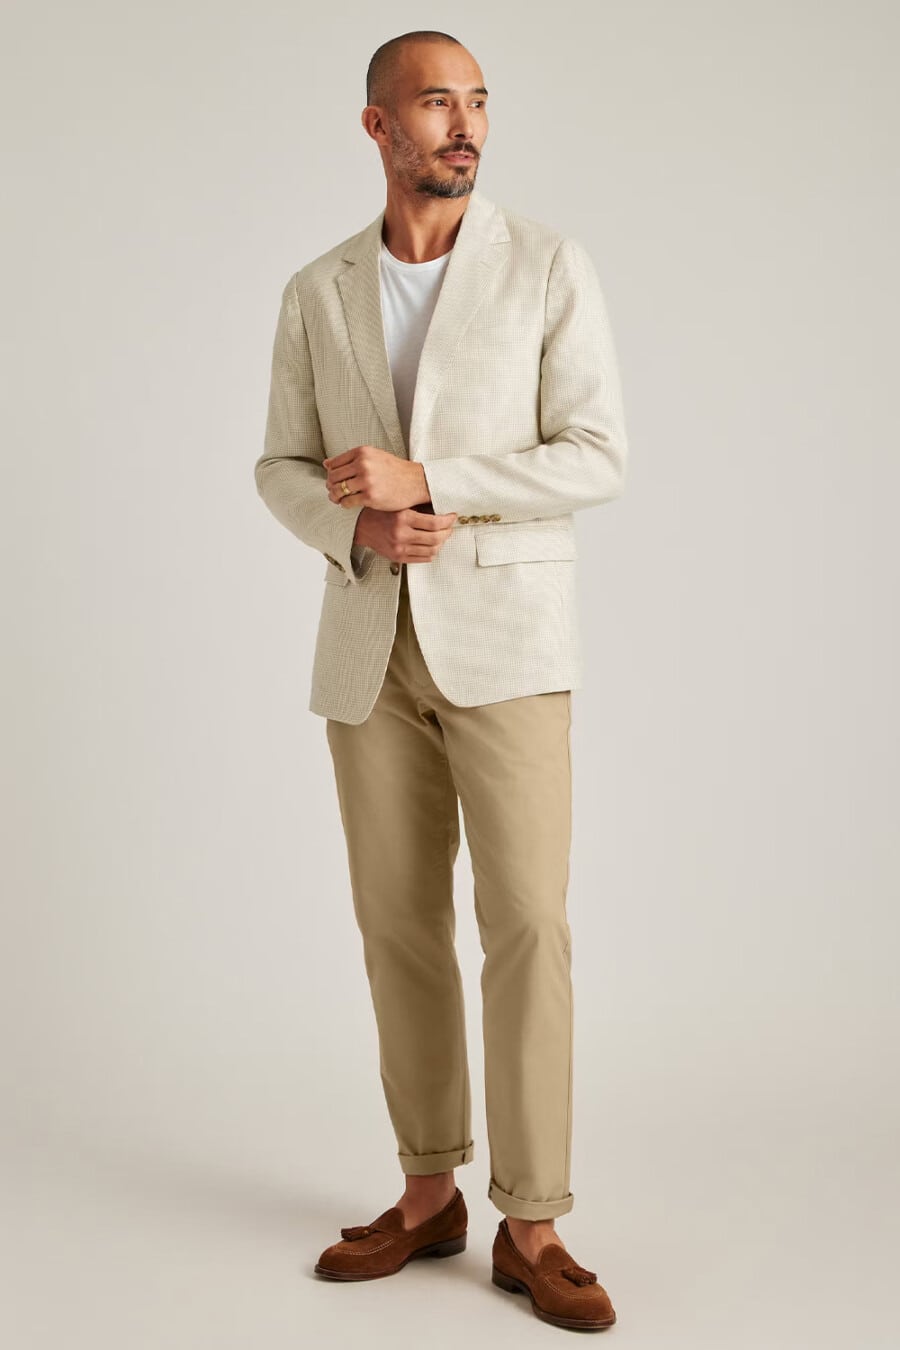 Men's khaki pants, white T-shirt, cream blazer and tan suede tassel loafers business casual outfit